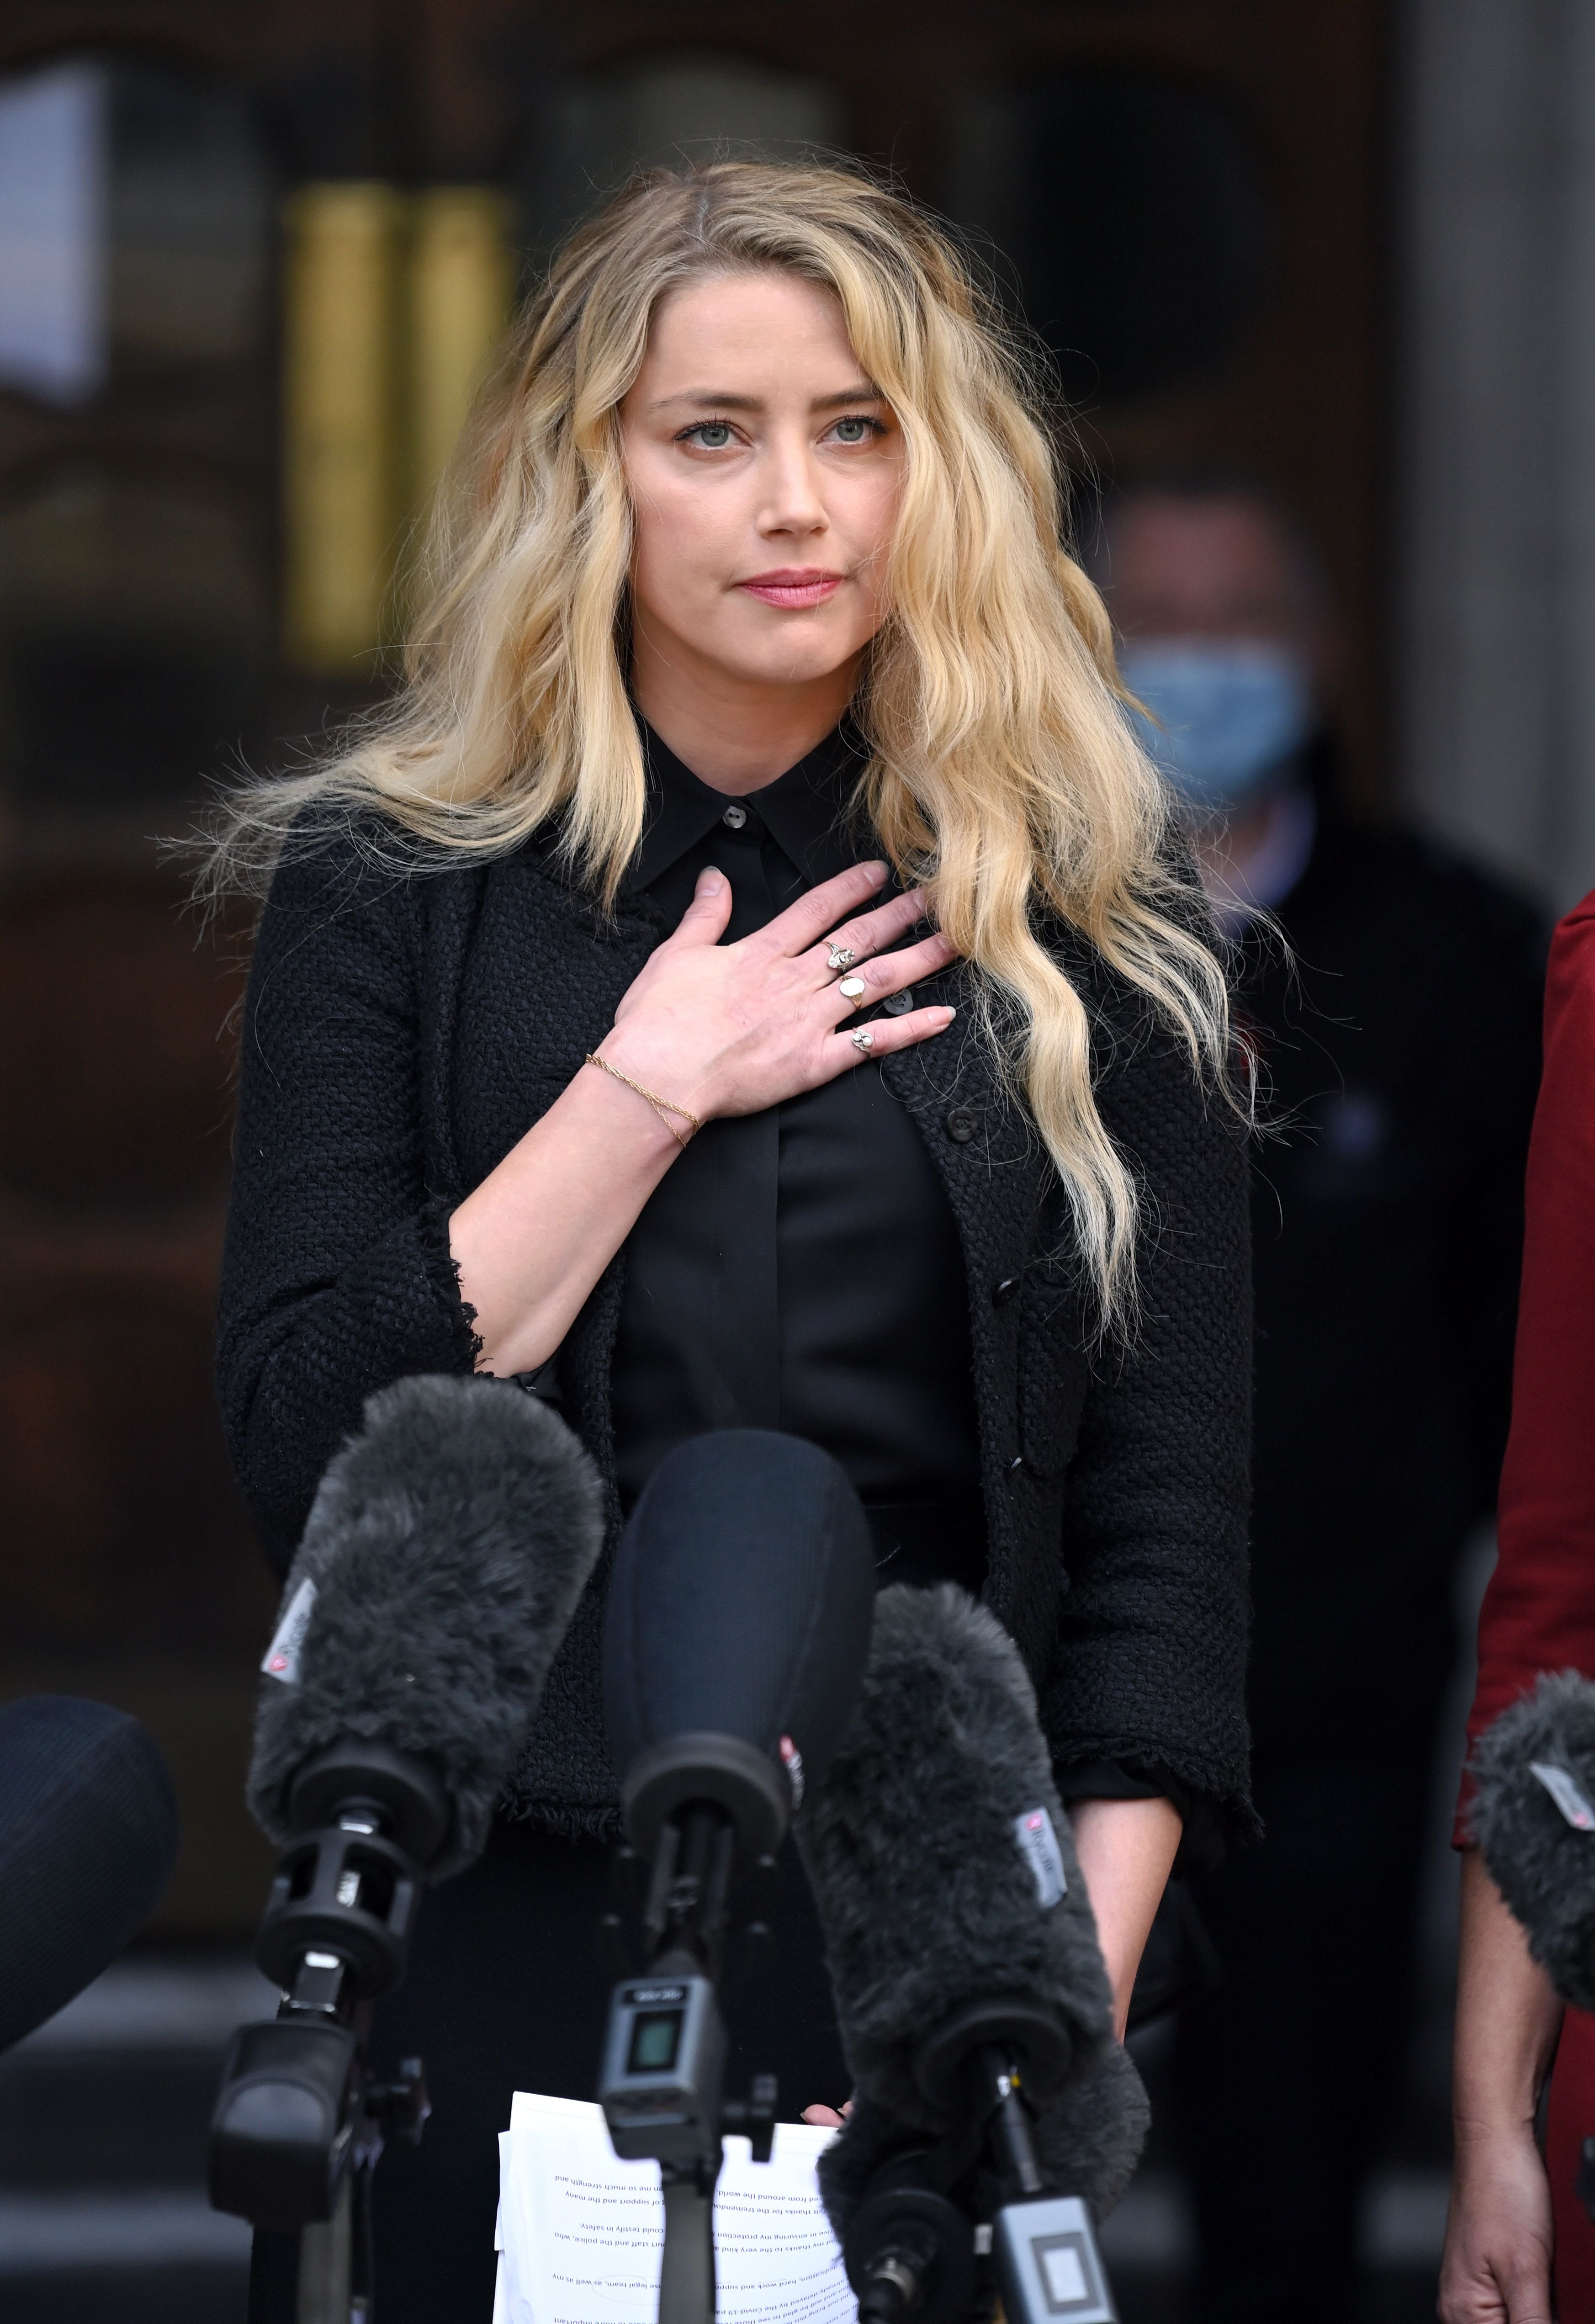 Amber Heard at the Royal Courts of Justice, the Strand on July 28, 2020 in London, England. | Source: Getty Images